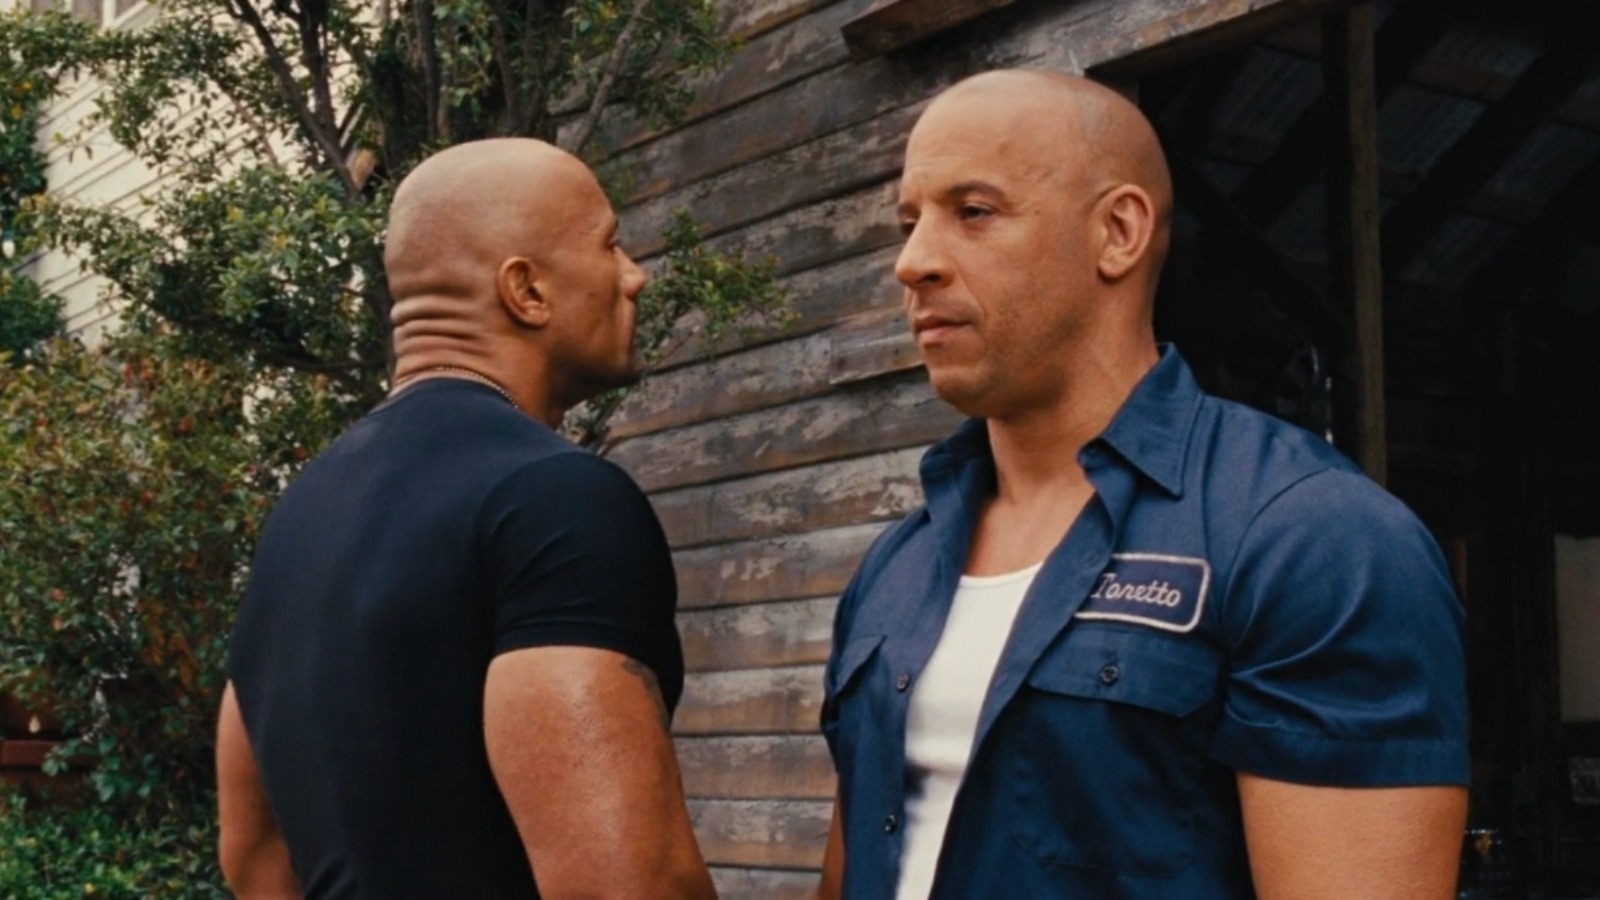 Vin Diesel Says He Could Totally Take Dwayne 'The Rock' Johnson In